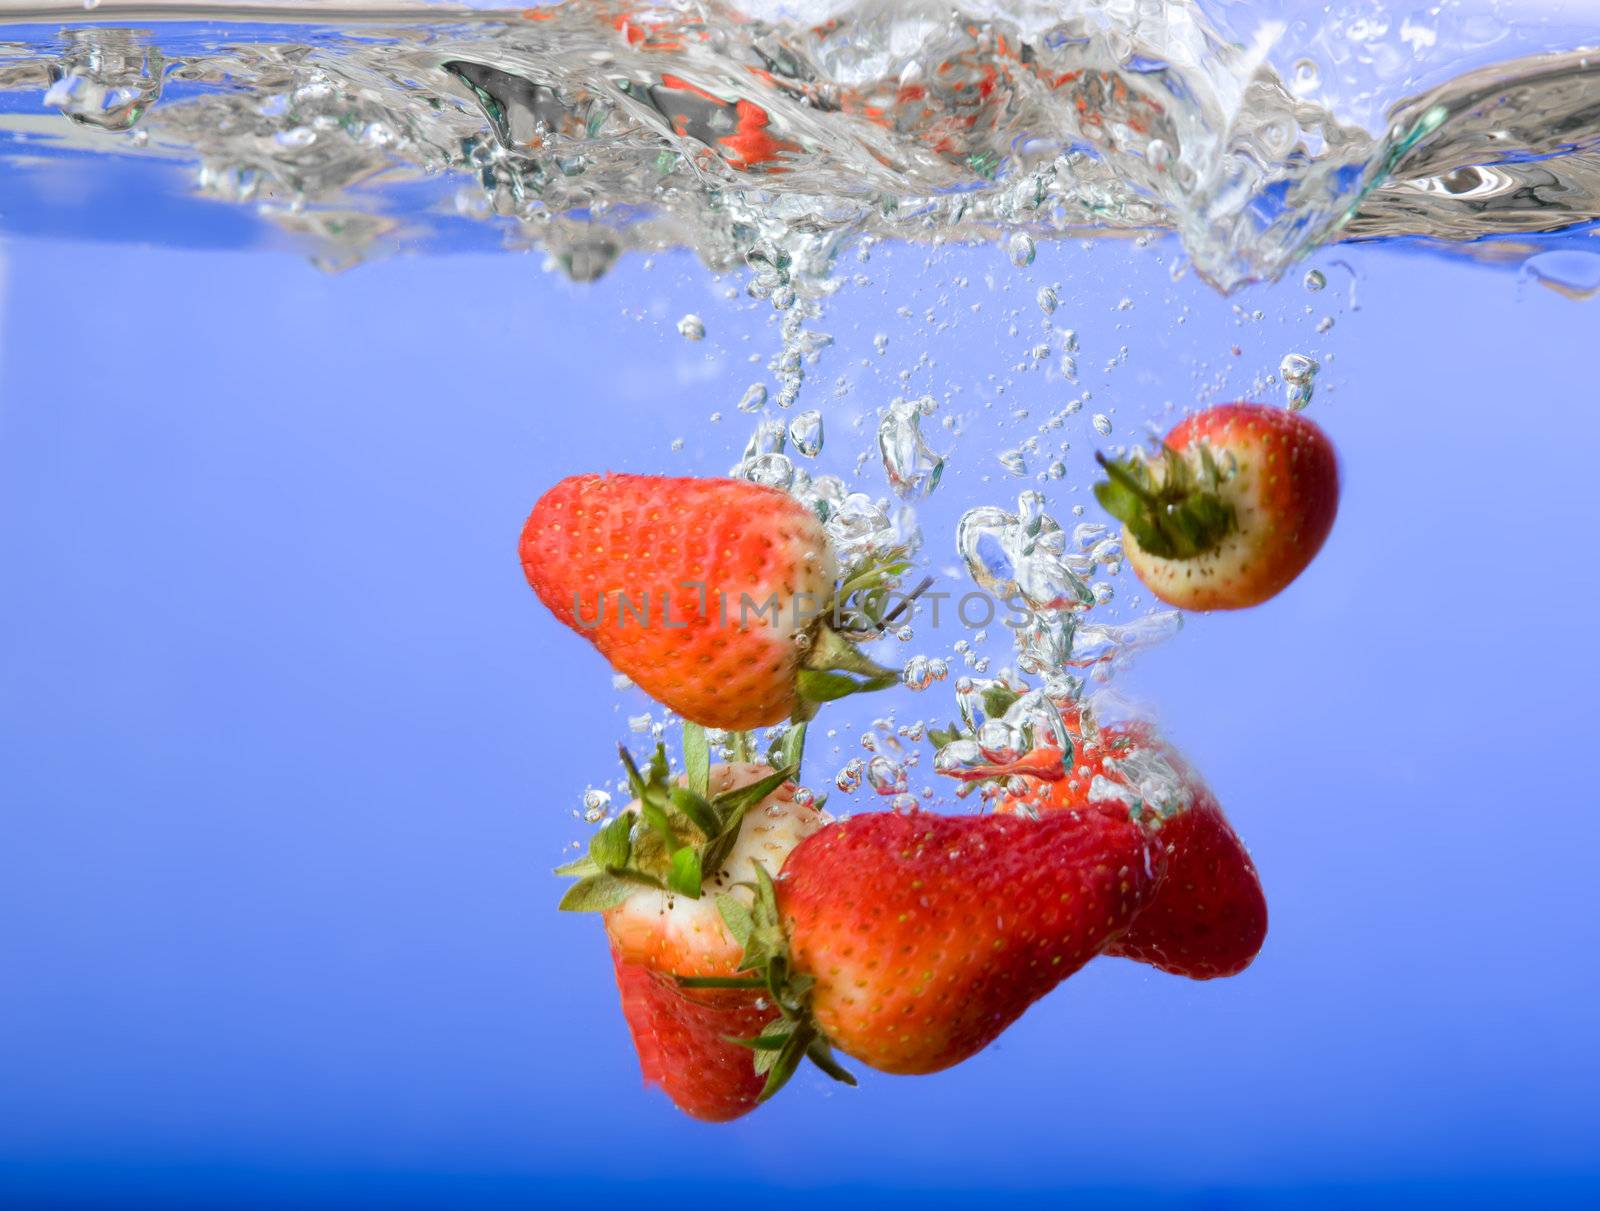 Strawberry Background in Water by leaf